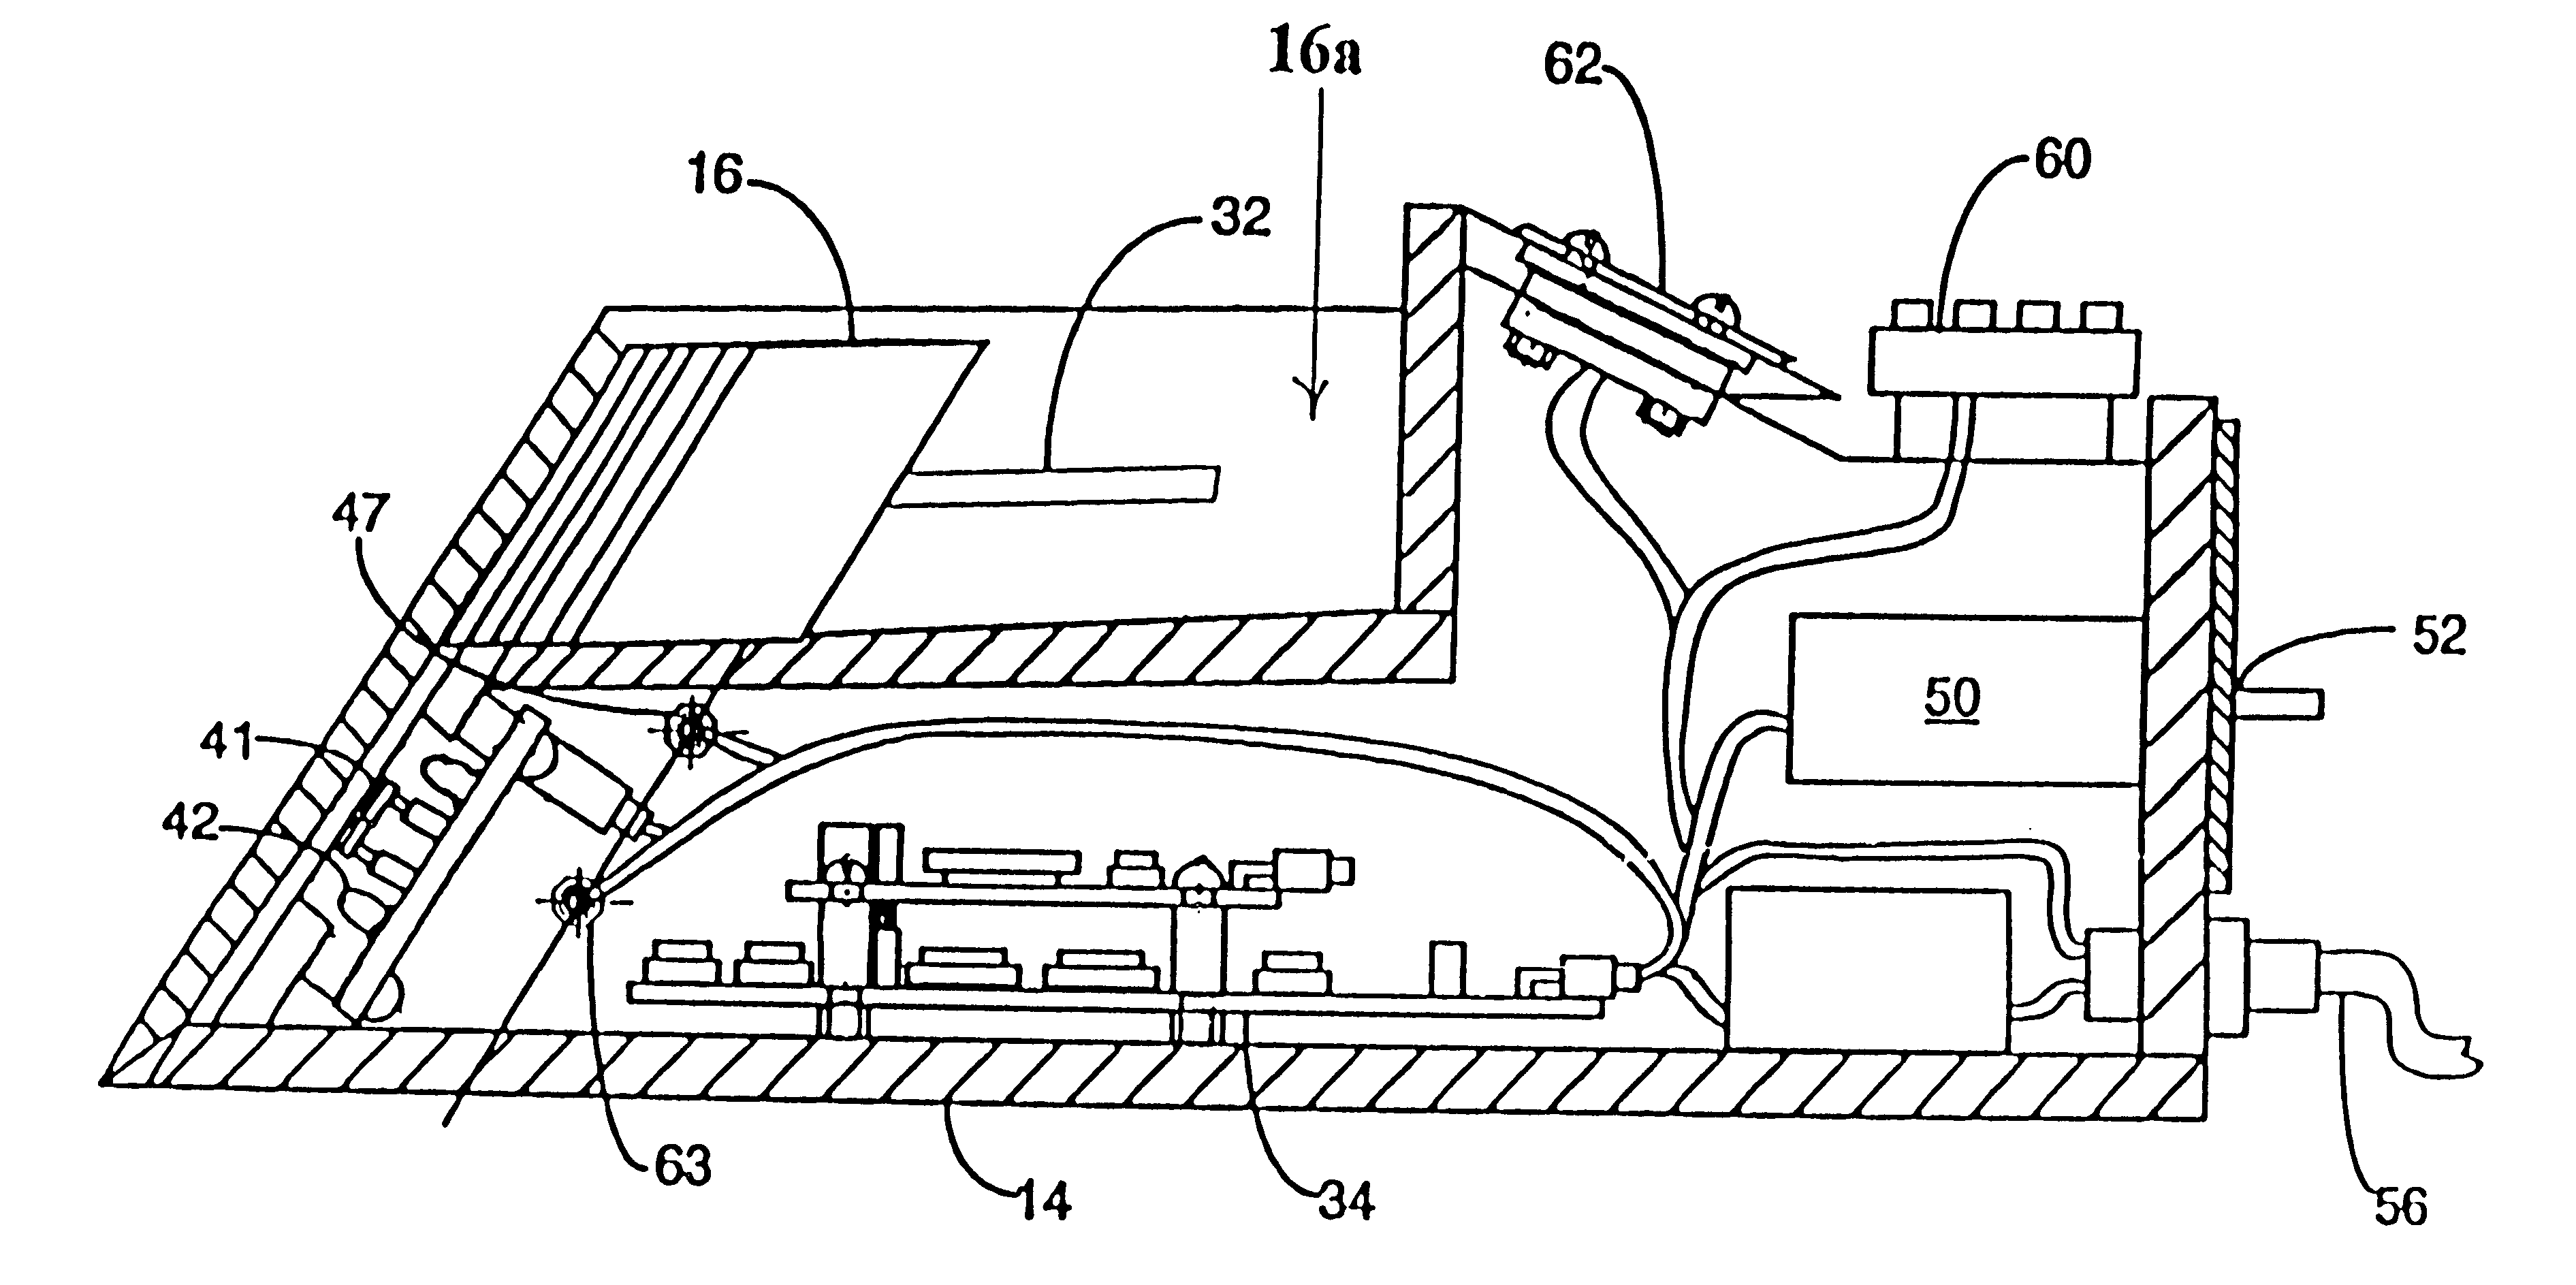 Card dispensing shoe with scanner apparatus, system and method therefor